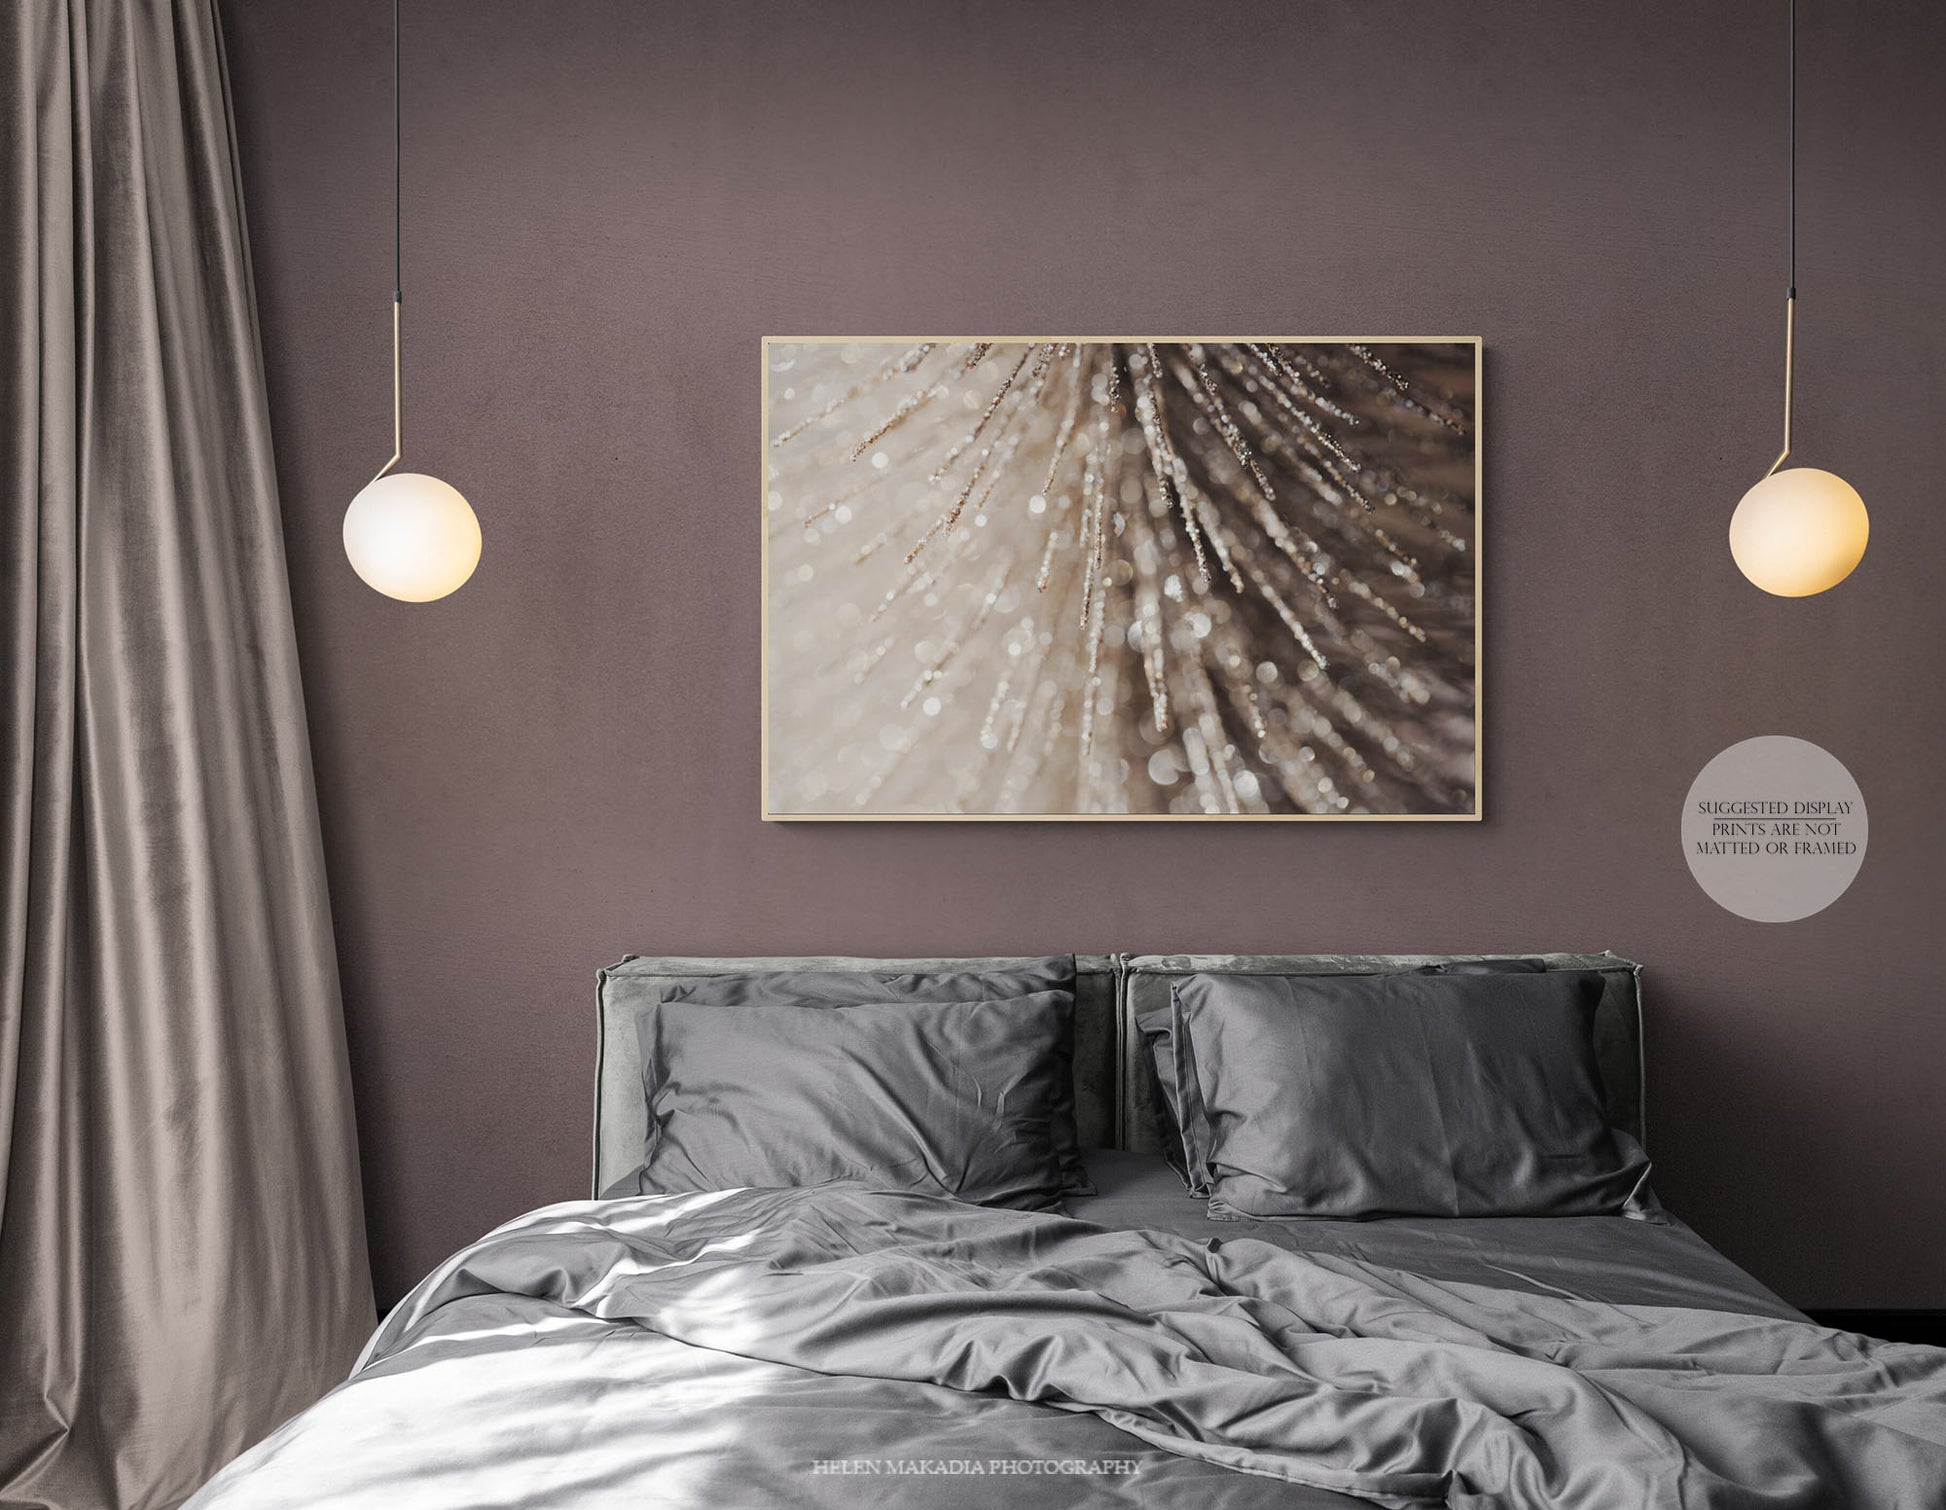 Gold and Glitter Wall Art framed in a Bedroom